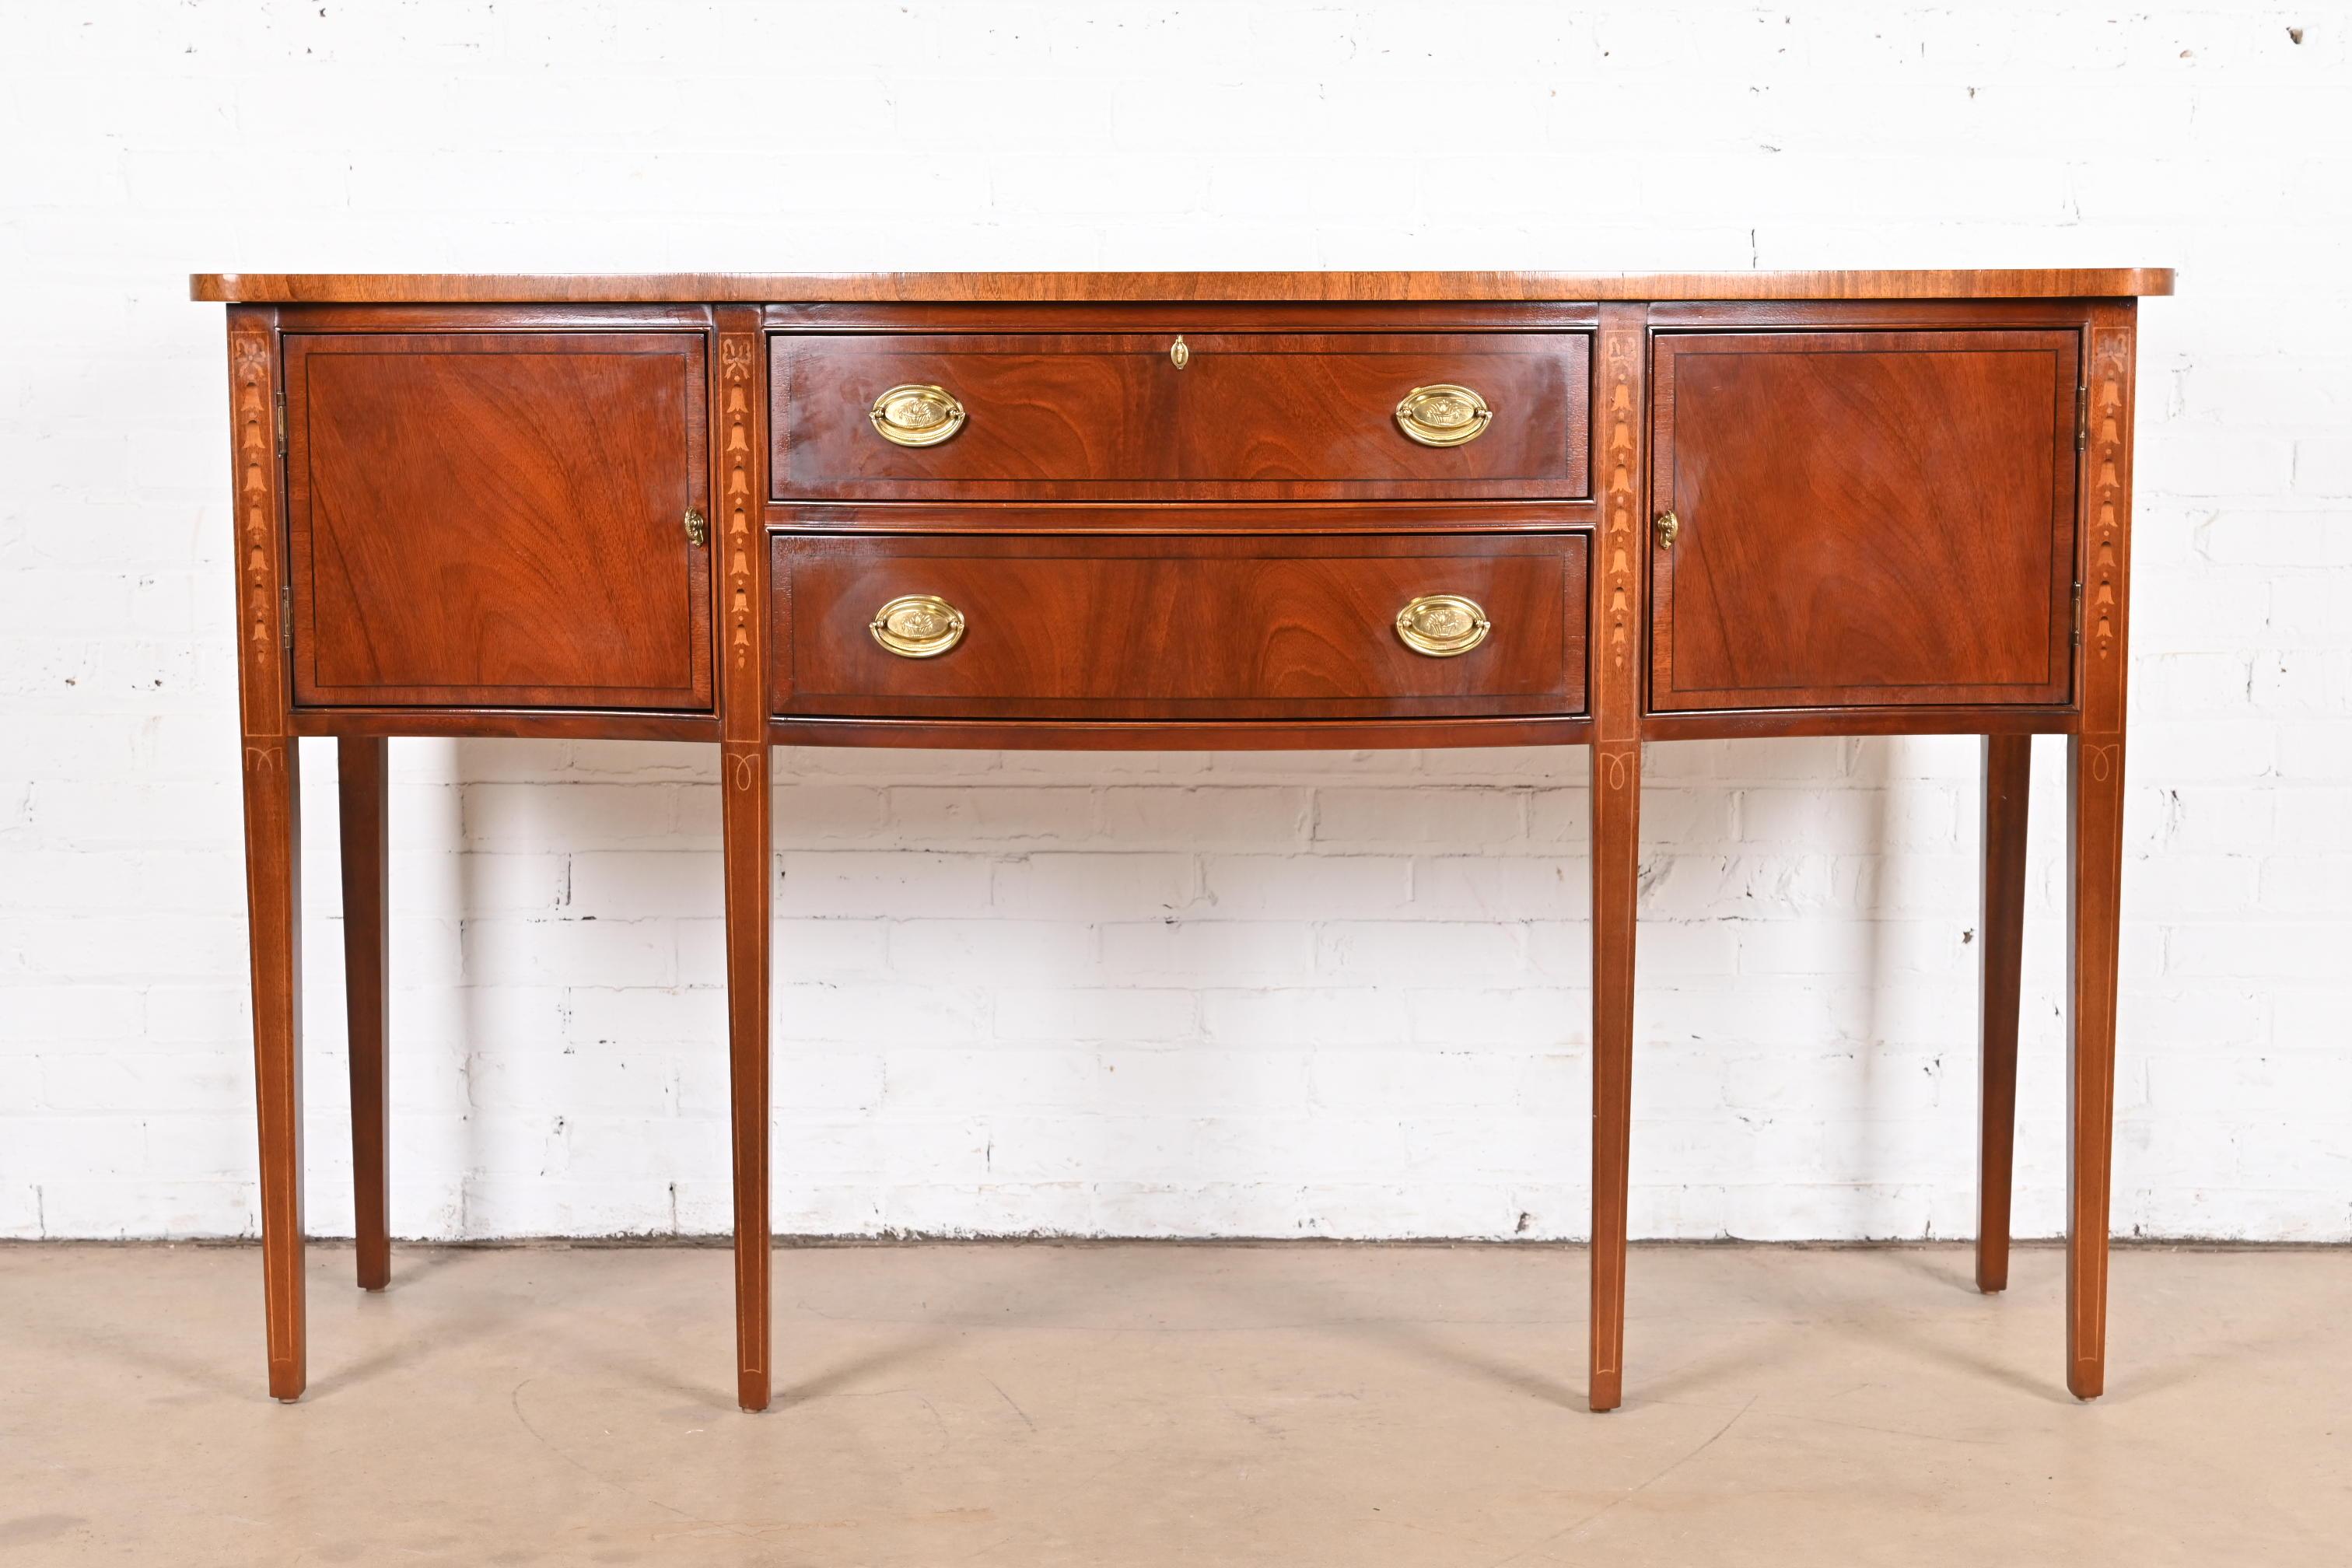 American Hepplewhite Inlaid Mahogany Serpentine Front Sideboard Credenza For Sale